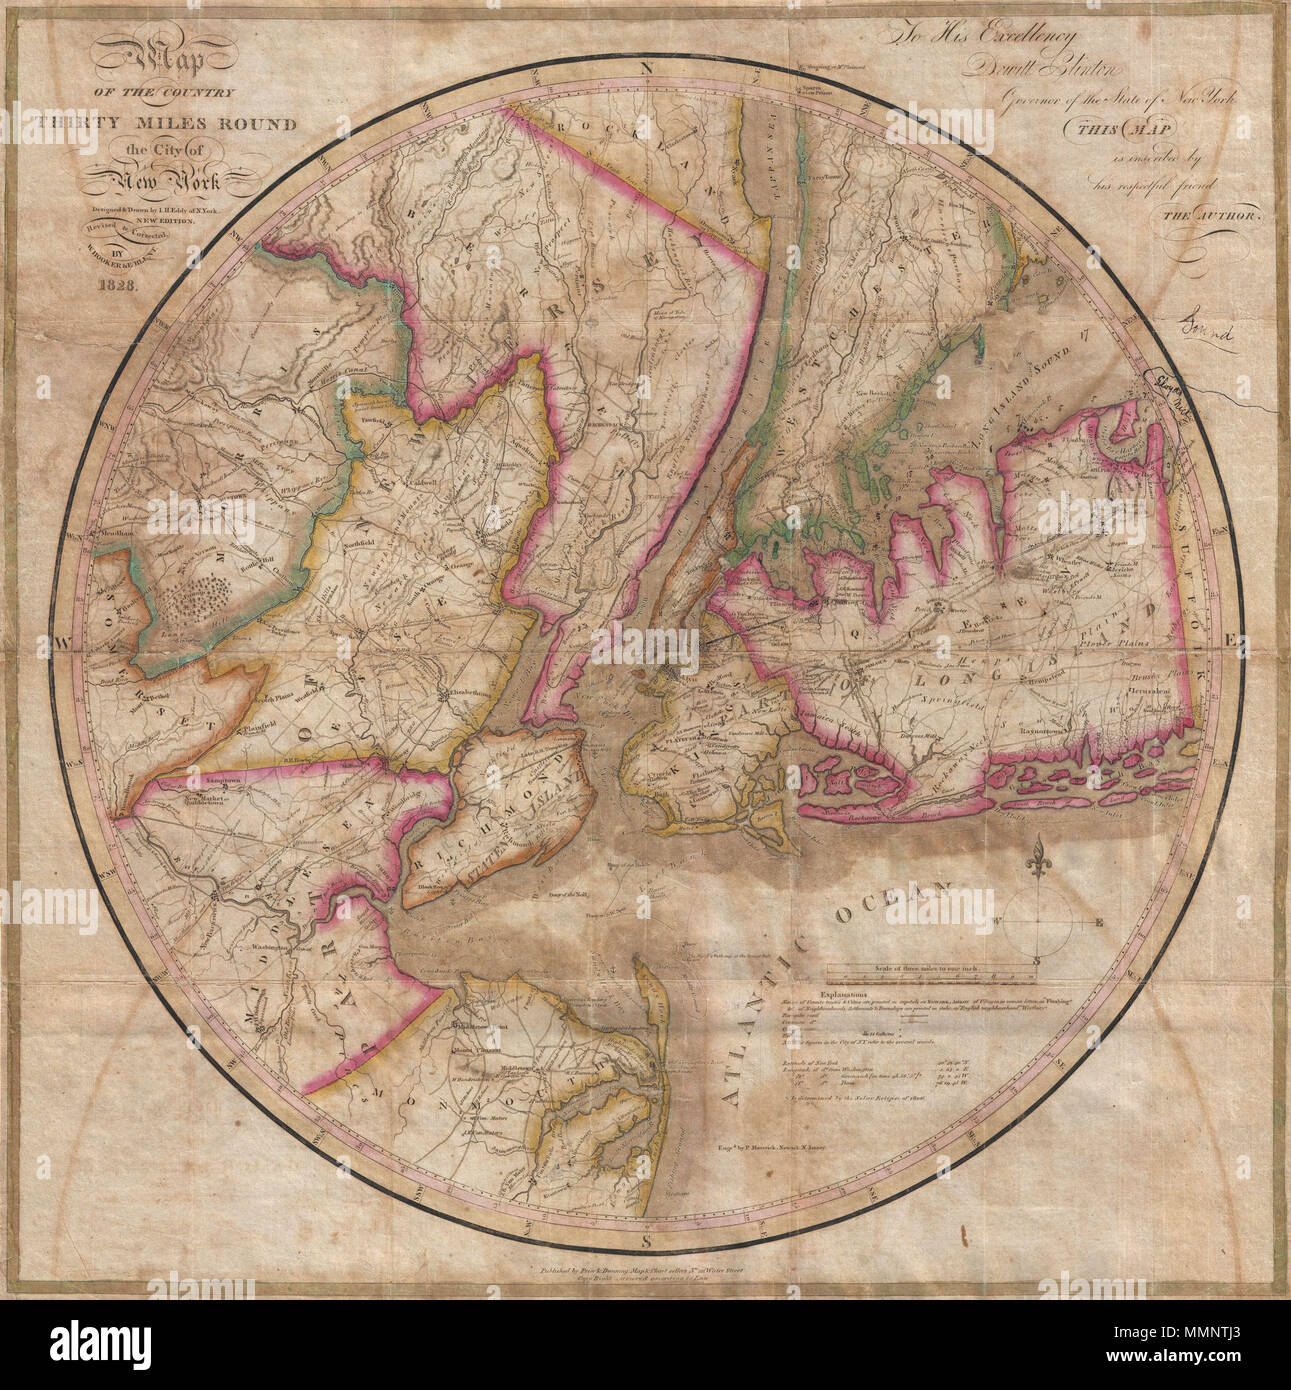 .  English: Known as The Eddy Map, this is an extremely rare and important circular map of New York City and vicinity, dated 1823. Covers the New York City area in roughly a thirty mile radius of Manhattan, extending north to Tarrytown, south to Monmouth, west to Somerset, and east to Suffolk County. Isaac Stokes, in his 1928 classic on the iconography of Manhattan, calls this map one of the most complete, accurate, and beautiful early engraved maps showing New York and its environs. It is also recorded that Thomas Jefferson kept a copy of this map in his personal library. Eddy's map offers im Stock Photo